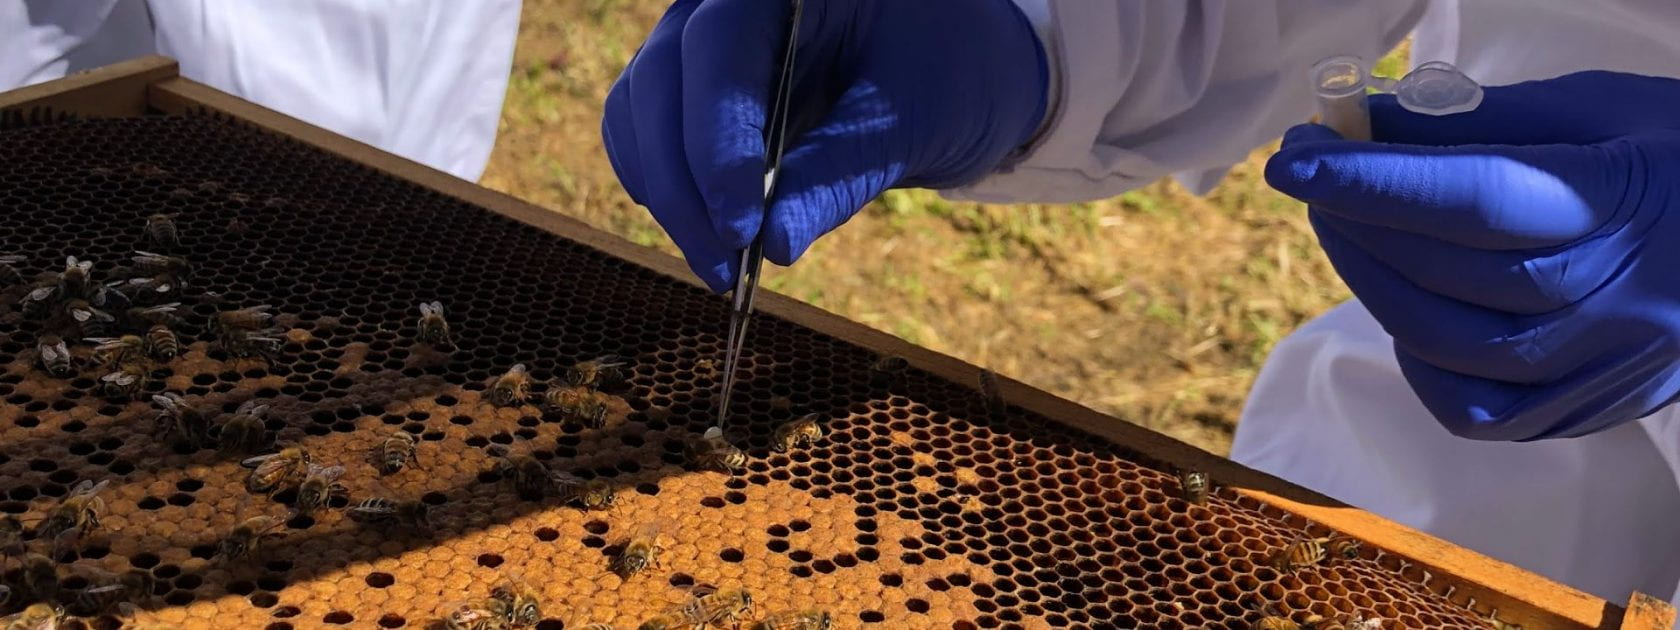 Picture of a researcher's hands using tweezers to pickup a bee from a bee frame and placed it into a collection tube.